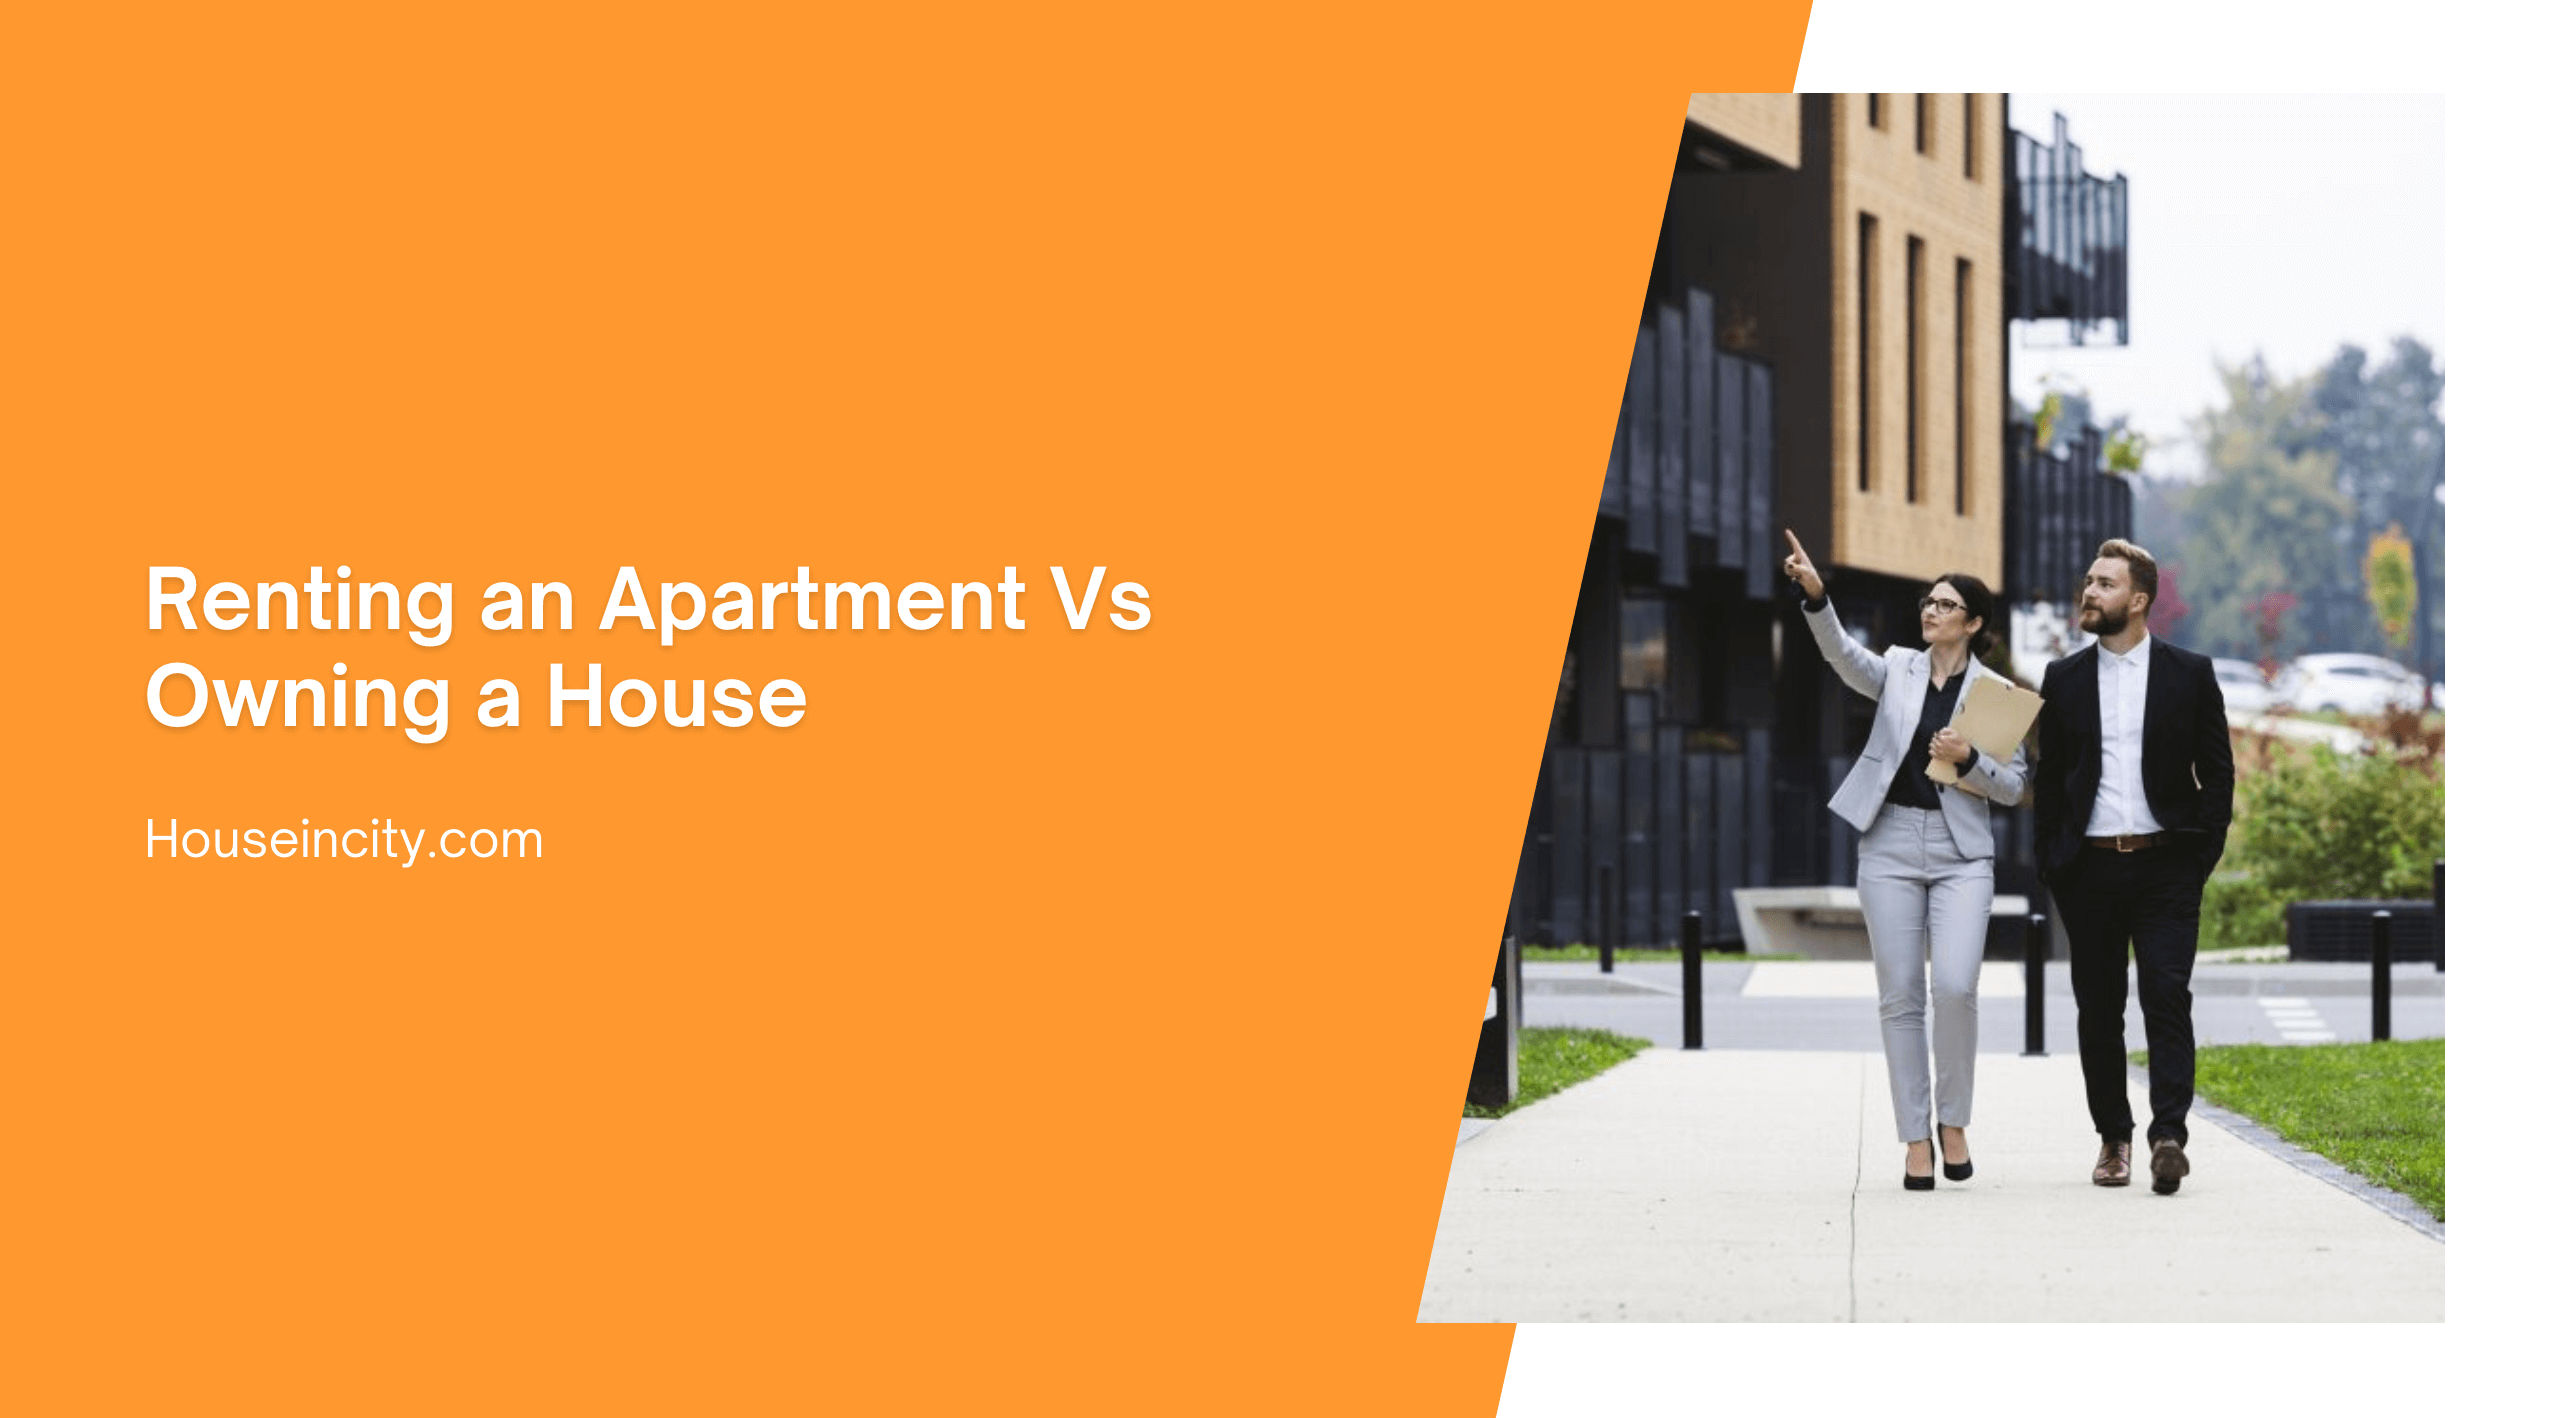 Renting an Apartment Vs Owning a House